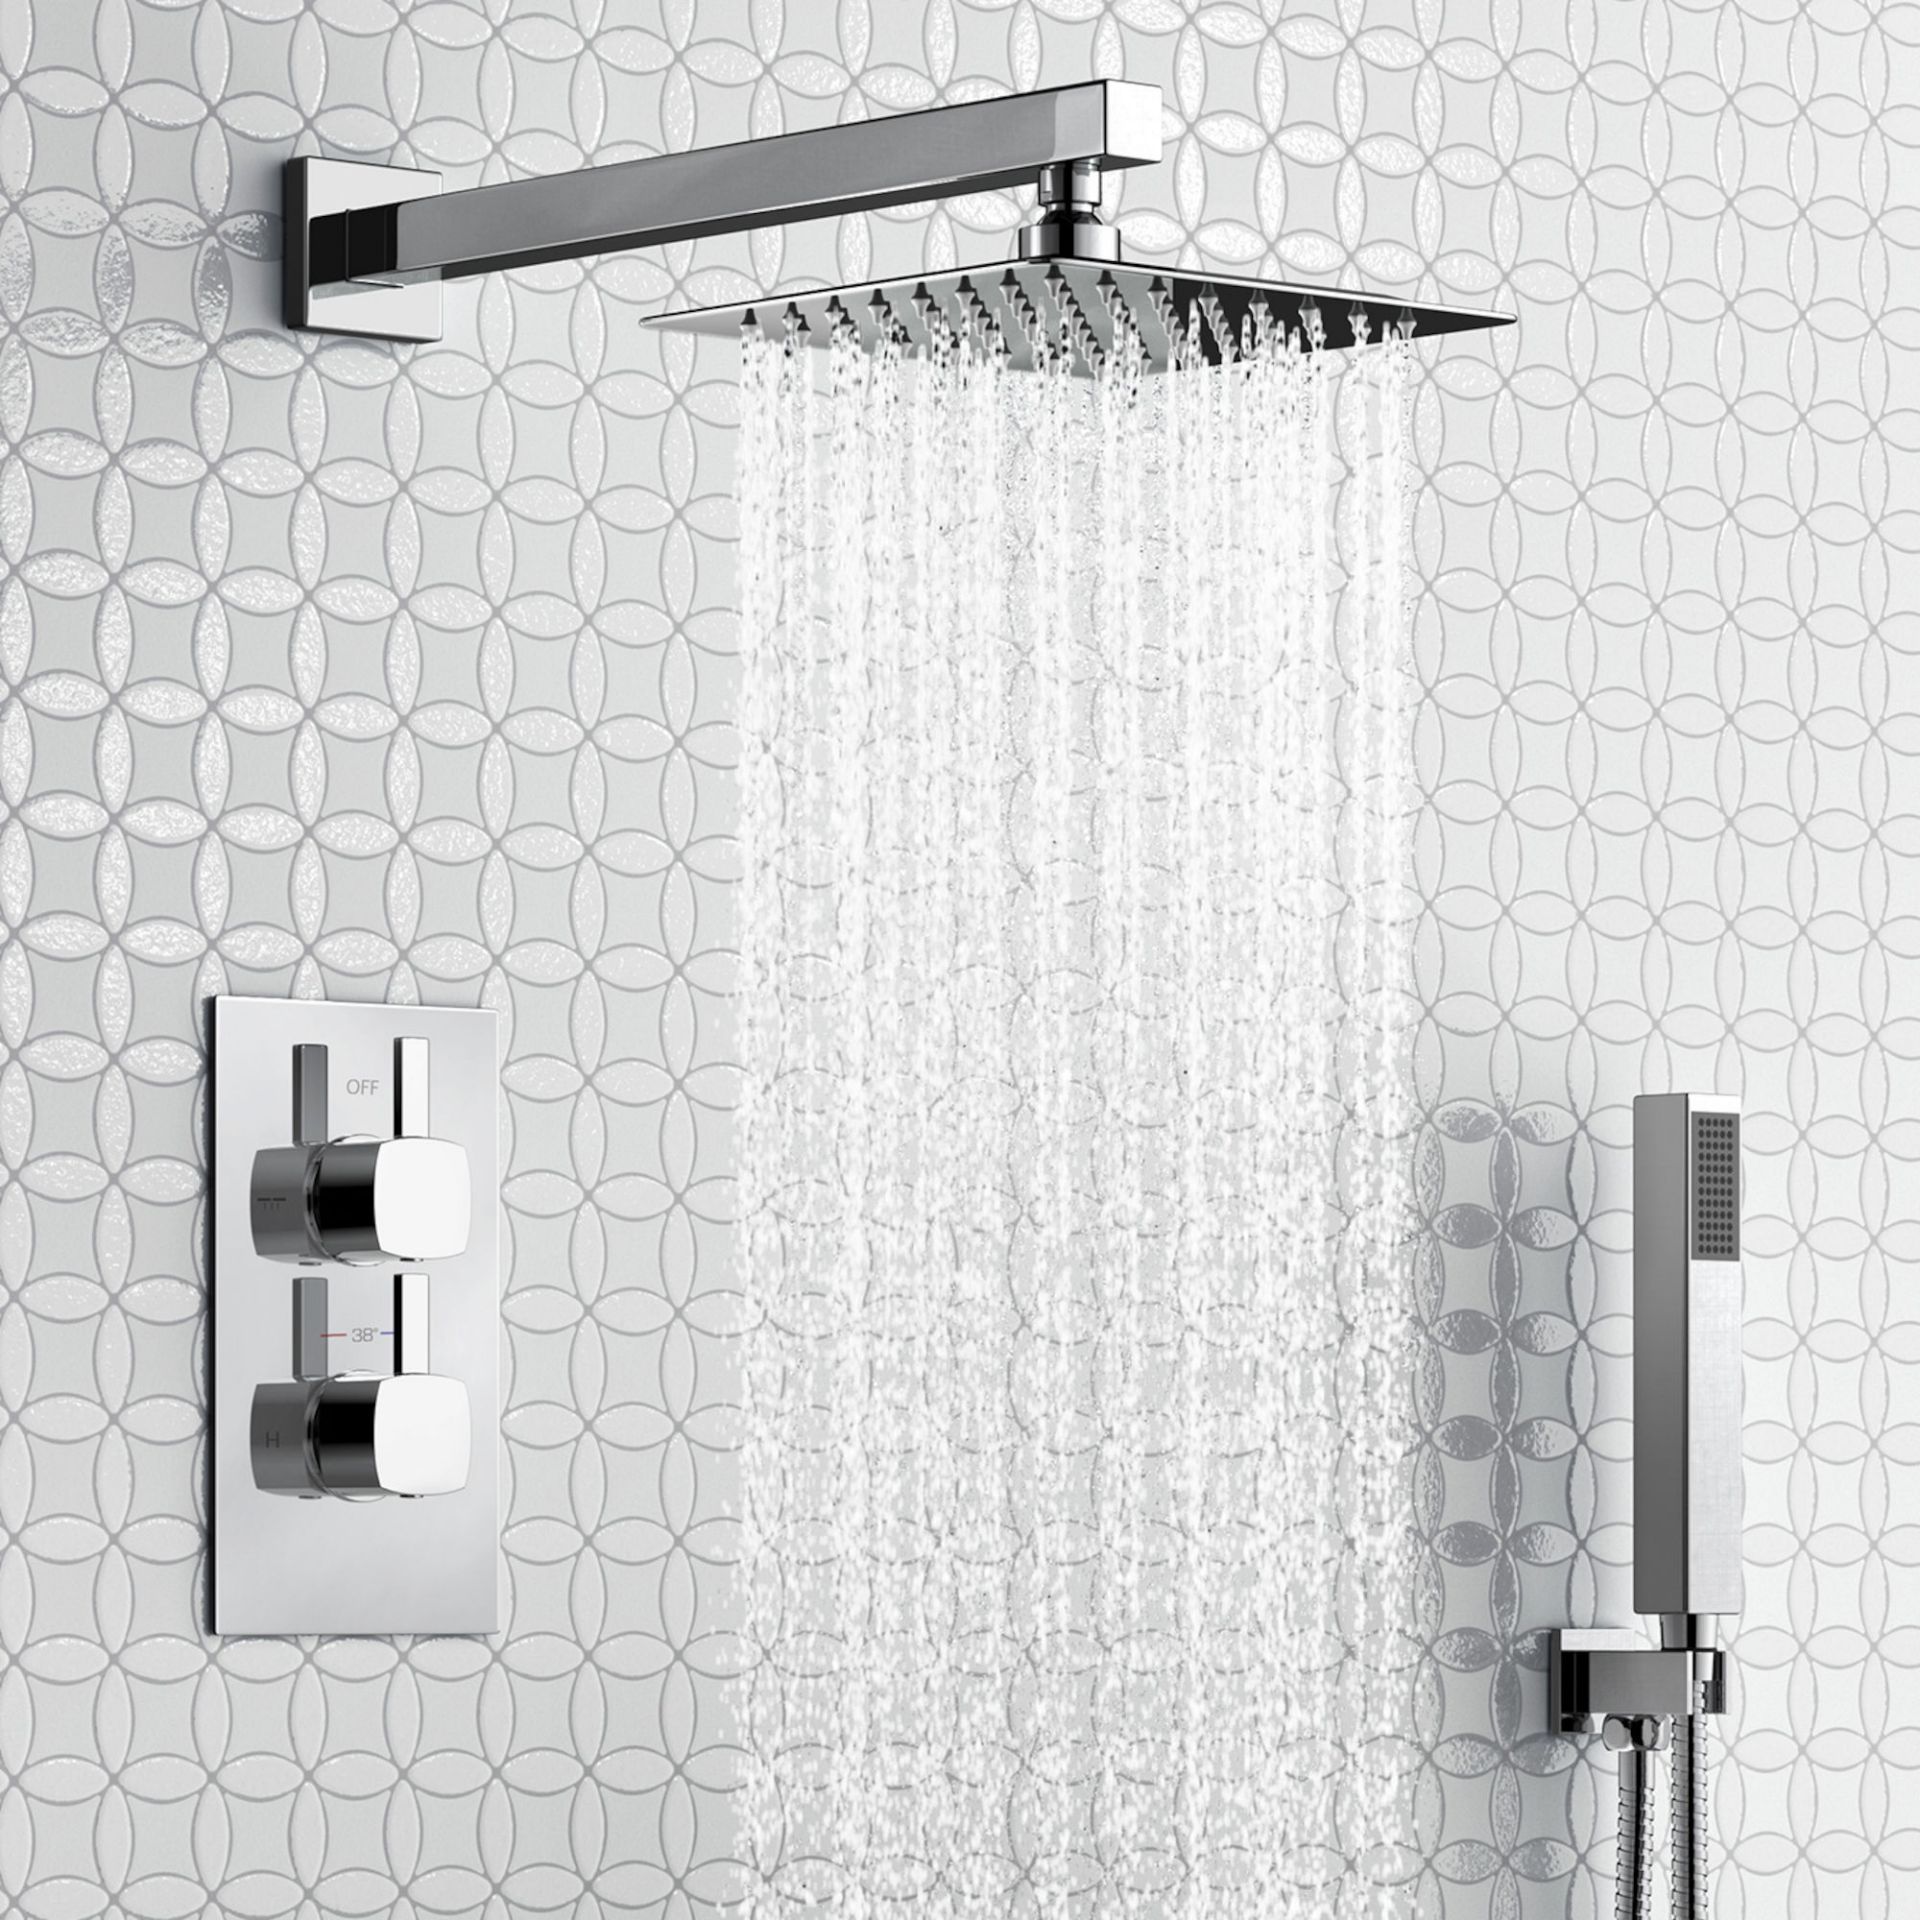 (KR61) Square Concealed Thermostatic Mixer Shower Kit & Medium Head. Family friendly detachable hand